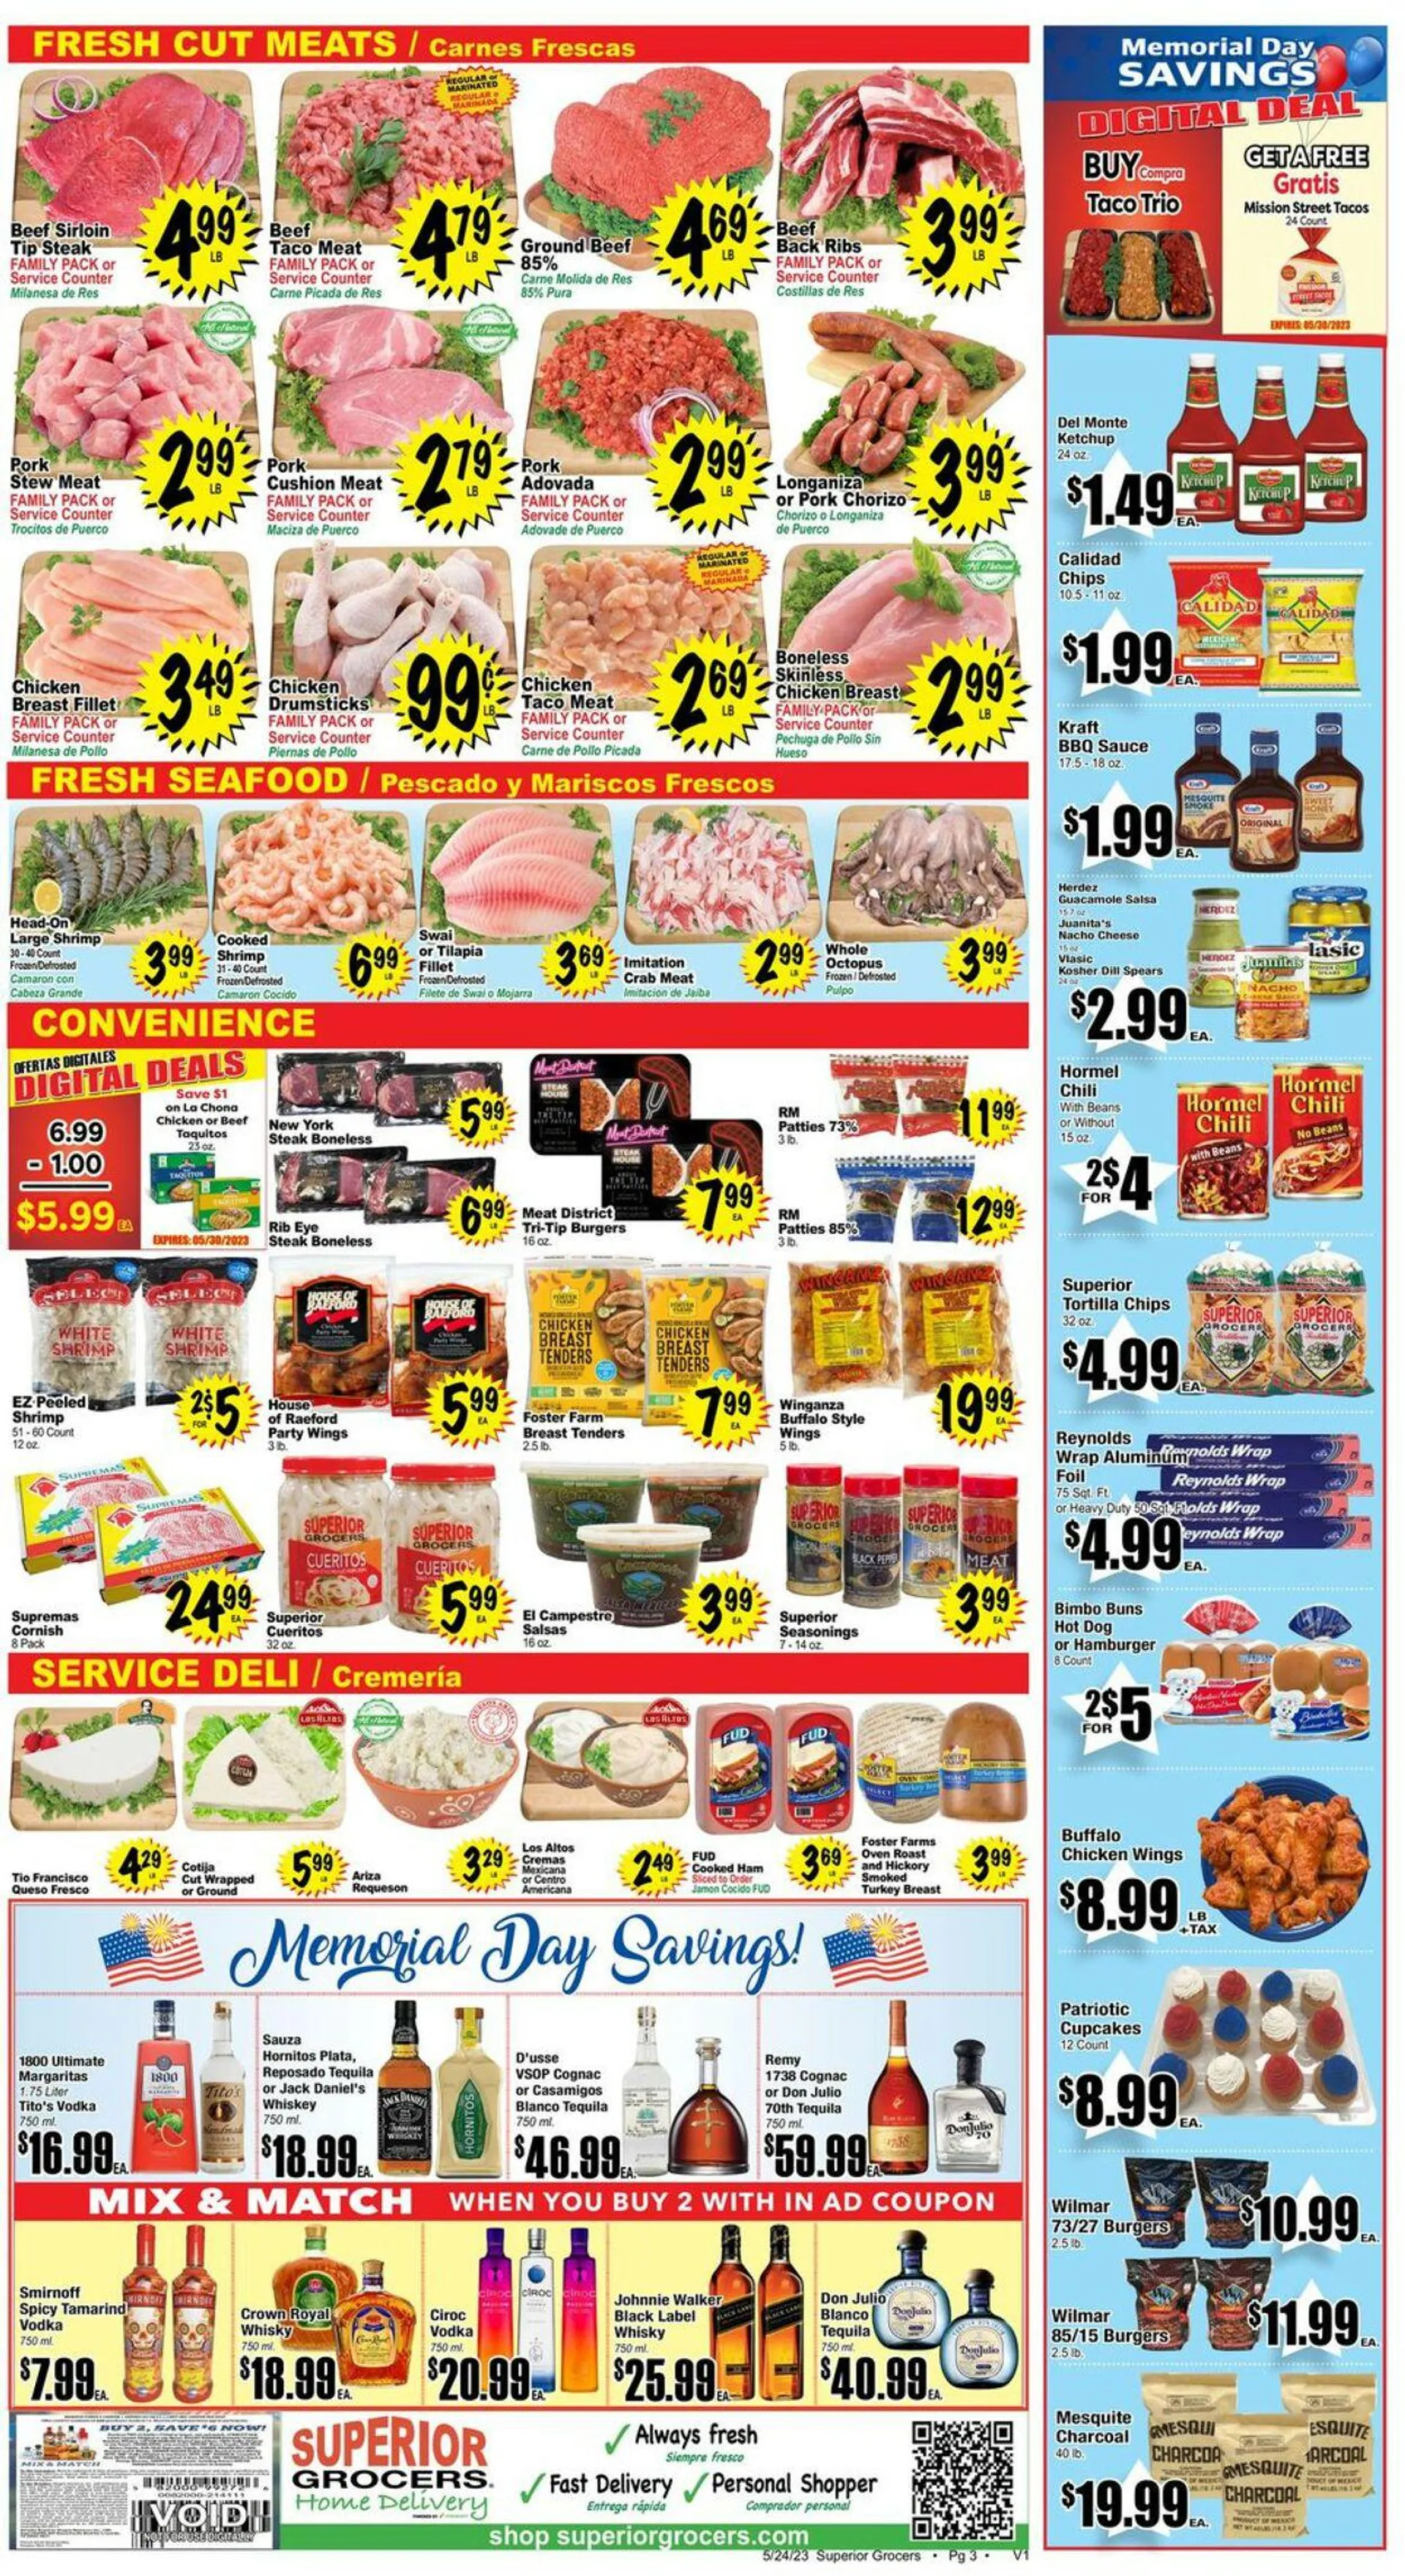 Superior Grocers Current weekly ad - 3